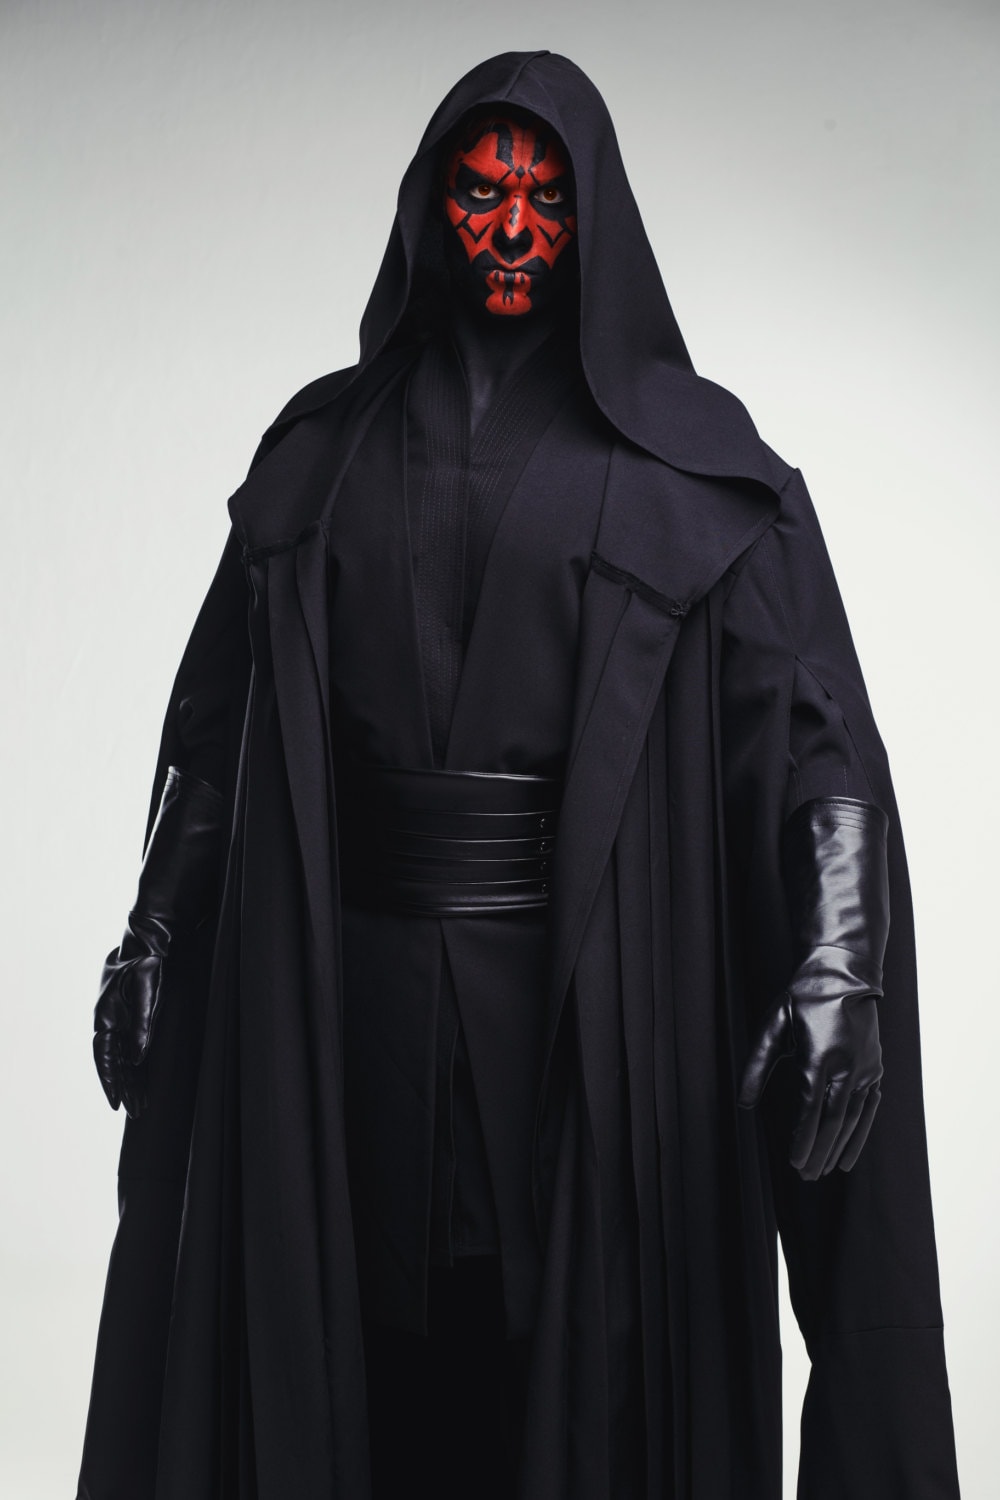 Star Wars hooded robe Sith Lord cosplay Darth Maul costume | Etsy